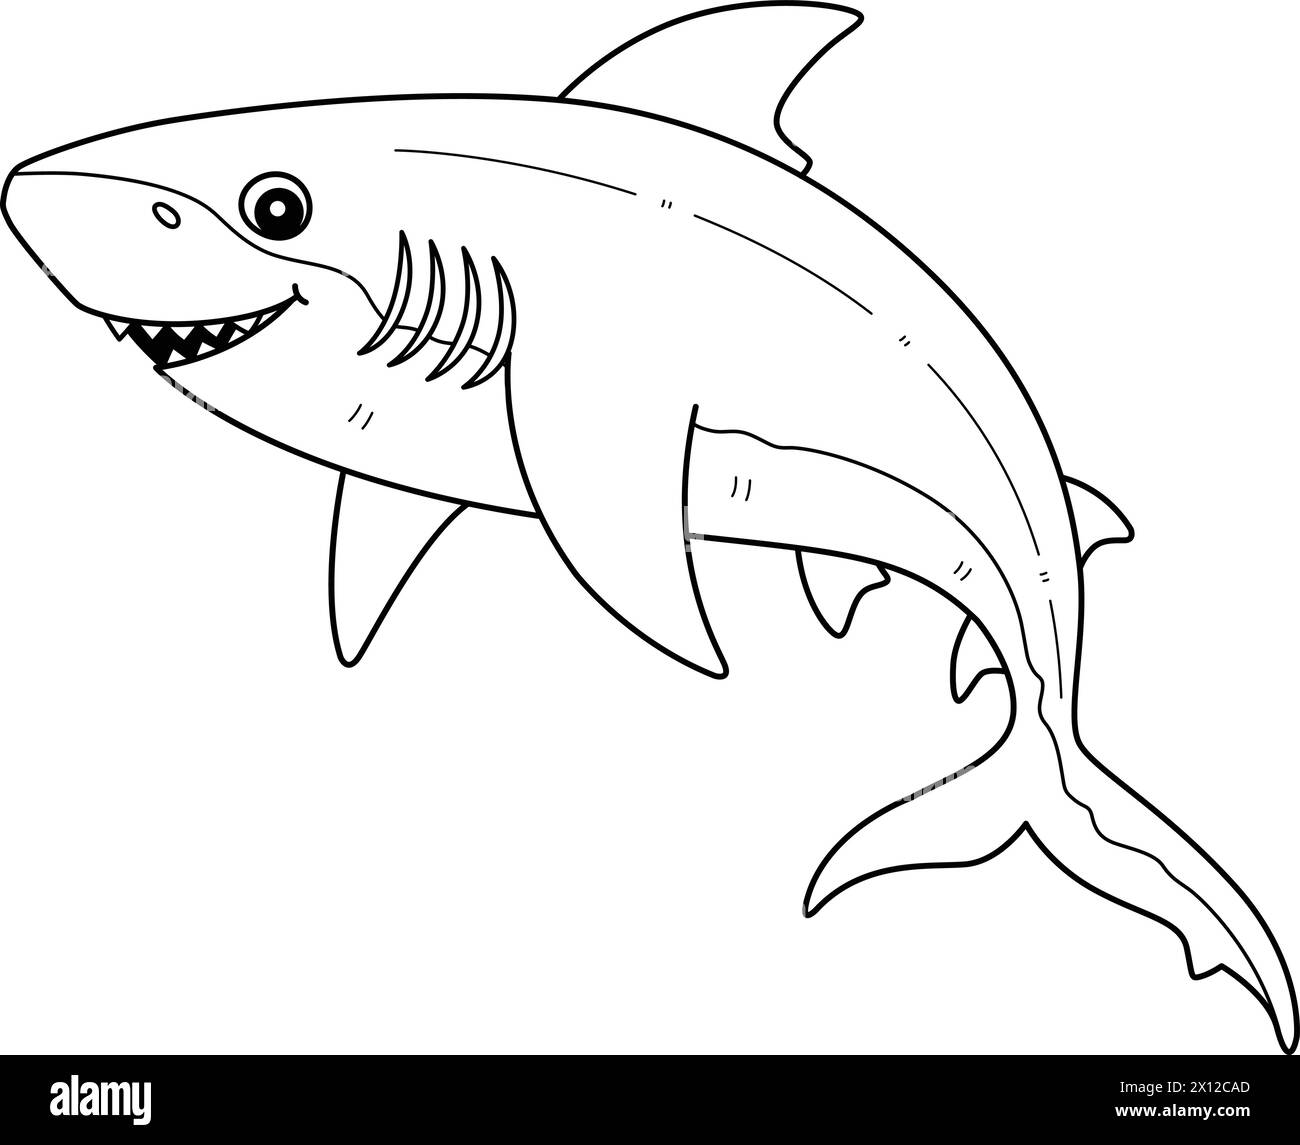 Bull Shark Isolated Coloring Page for Kids Illustrazione Vettoriale